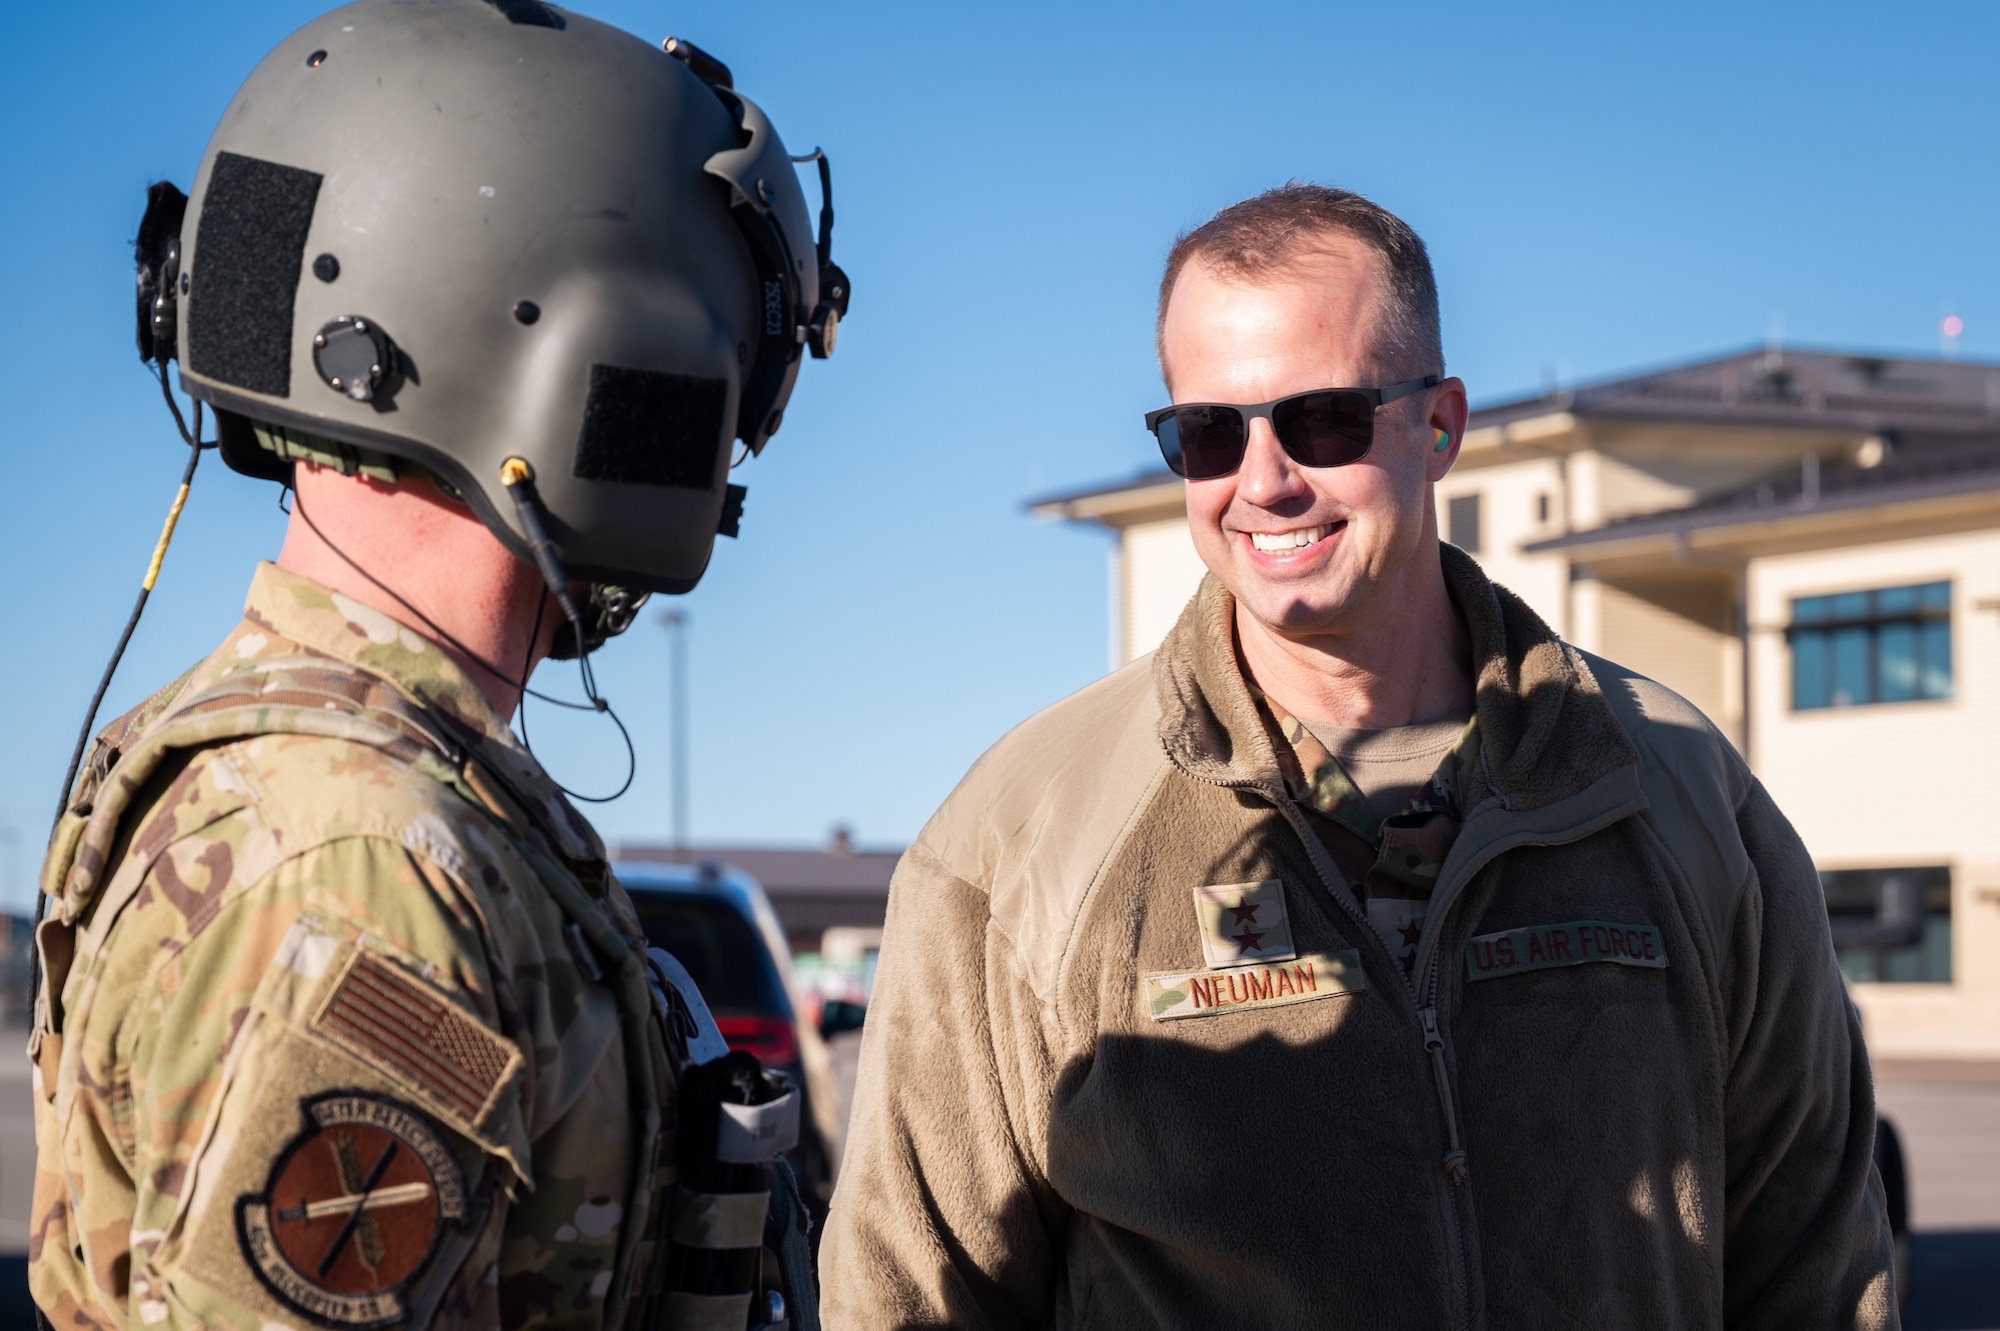 A man in military uniform and sunglasses smiles to greet a military pilot in front of him.